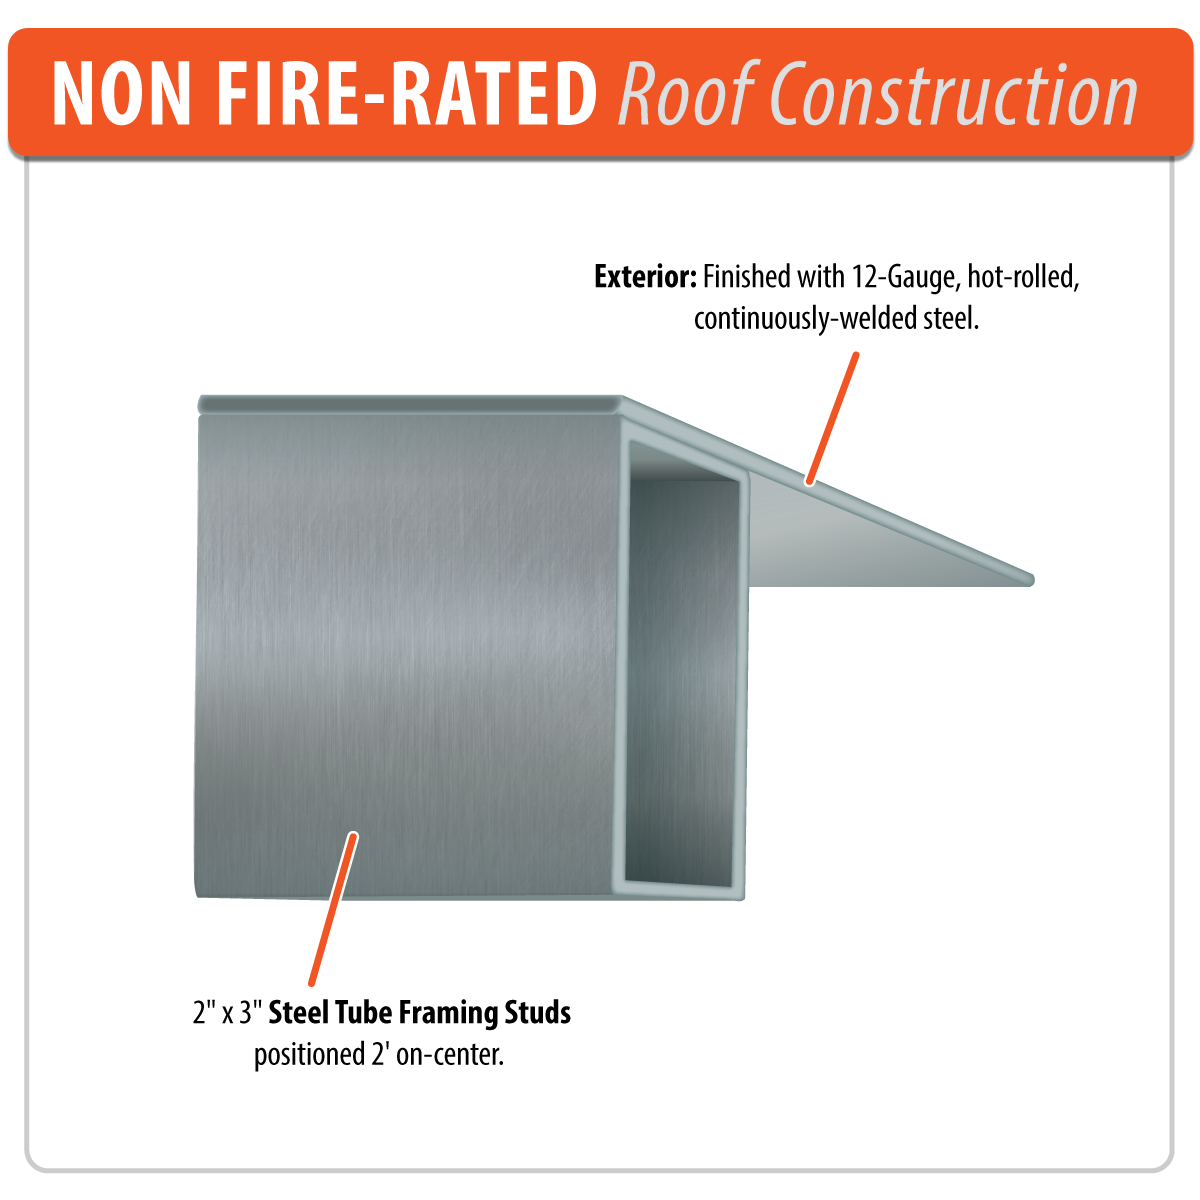 Non Fire-Rated Roof Construction Feature - No Insulation